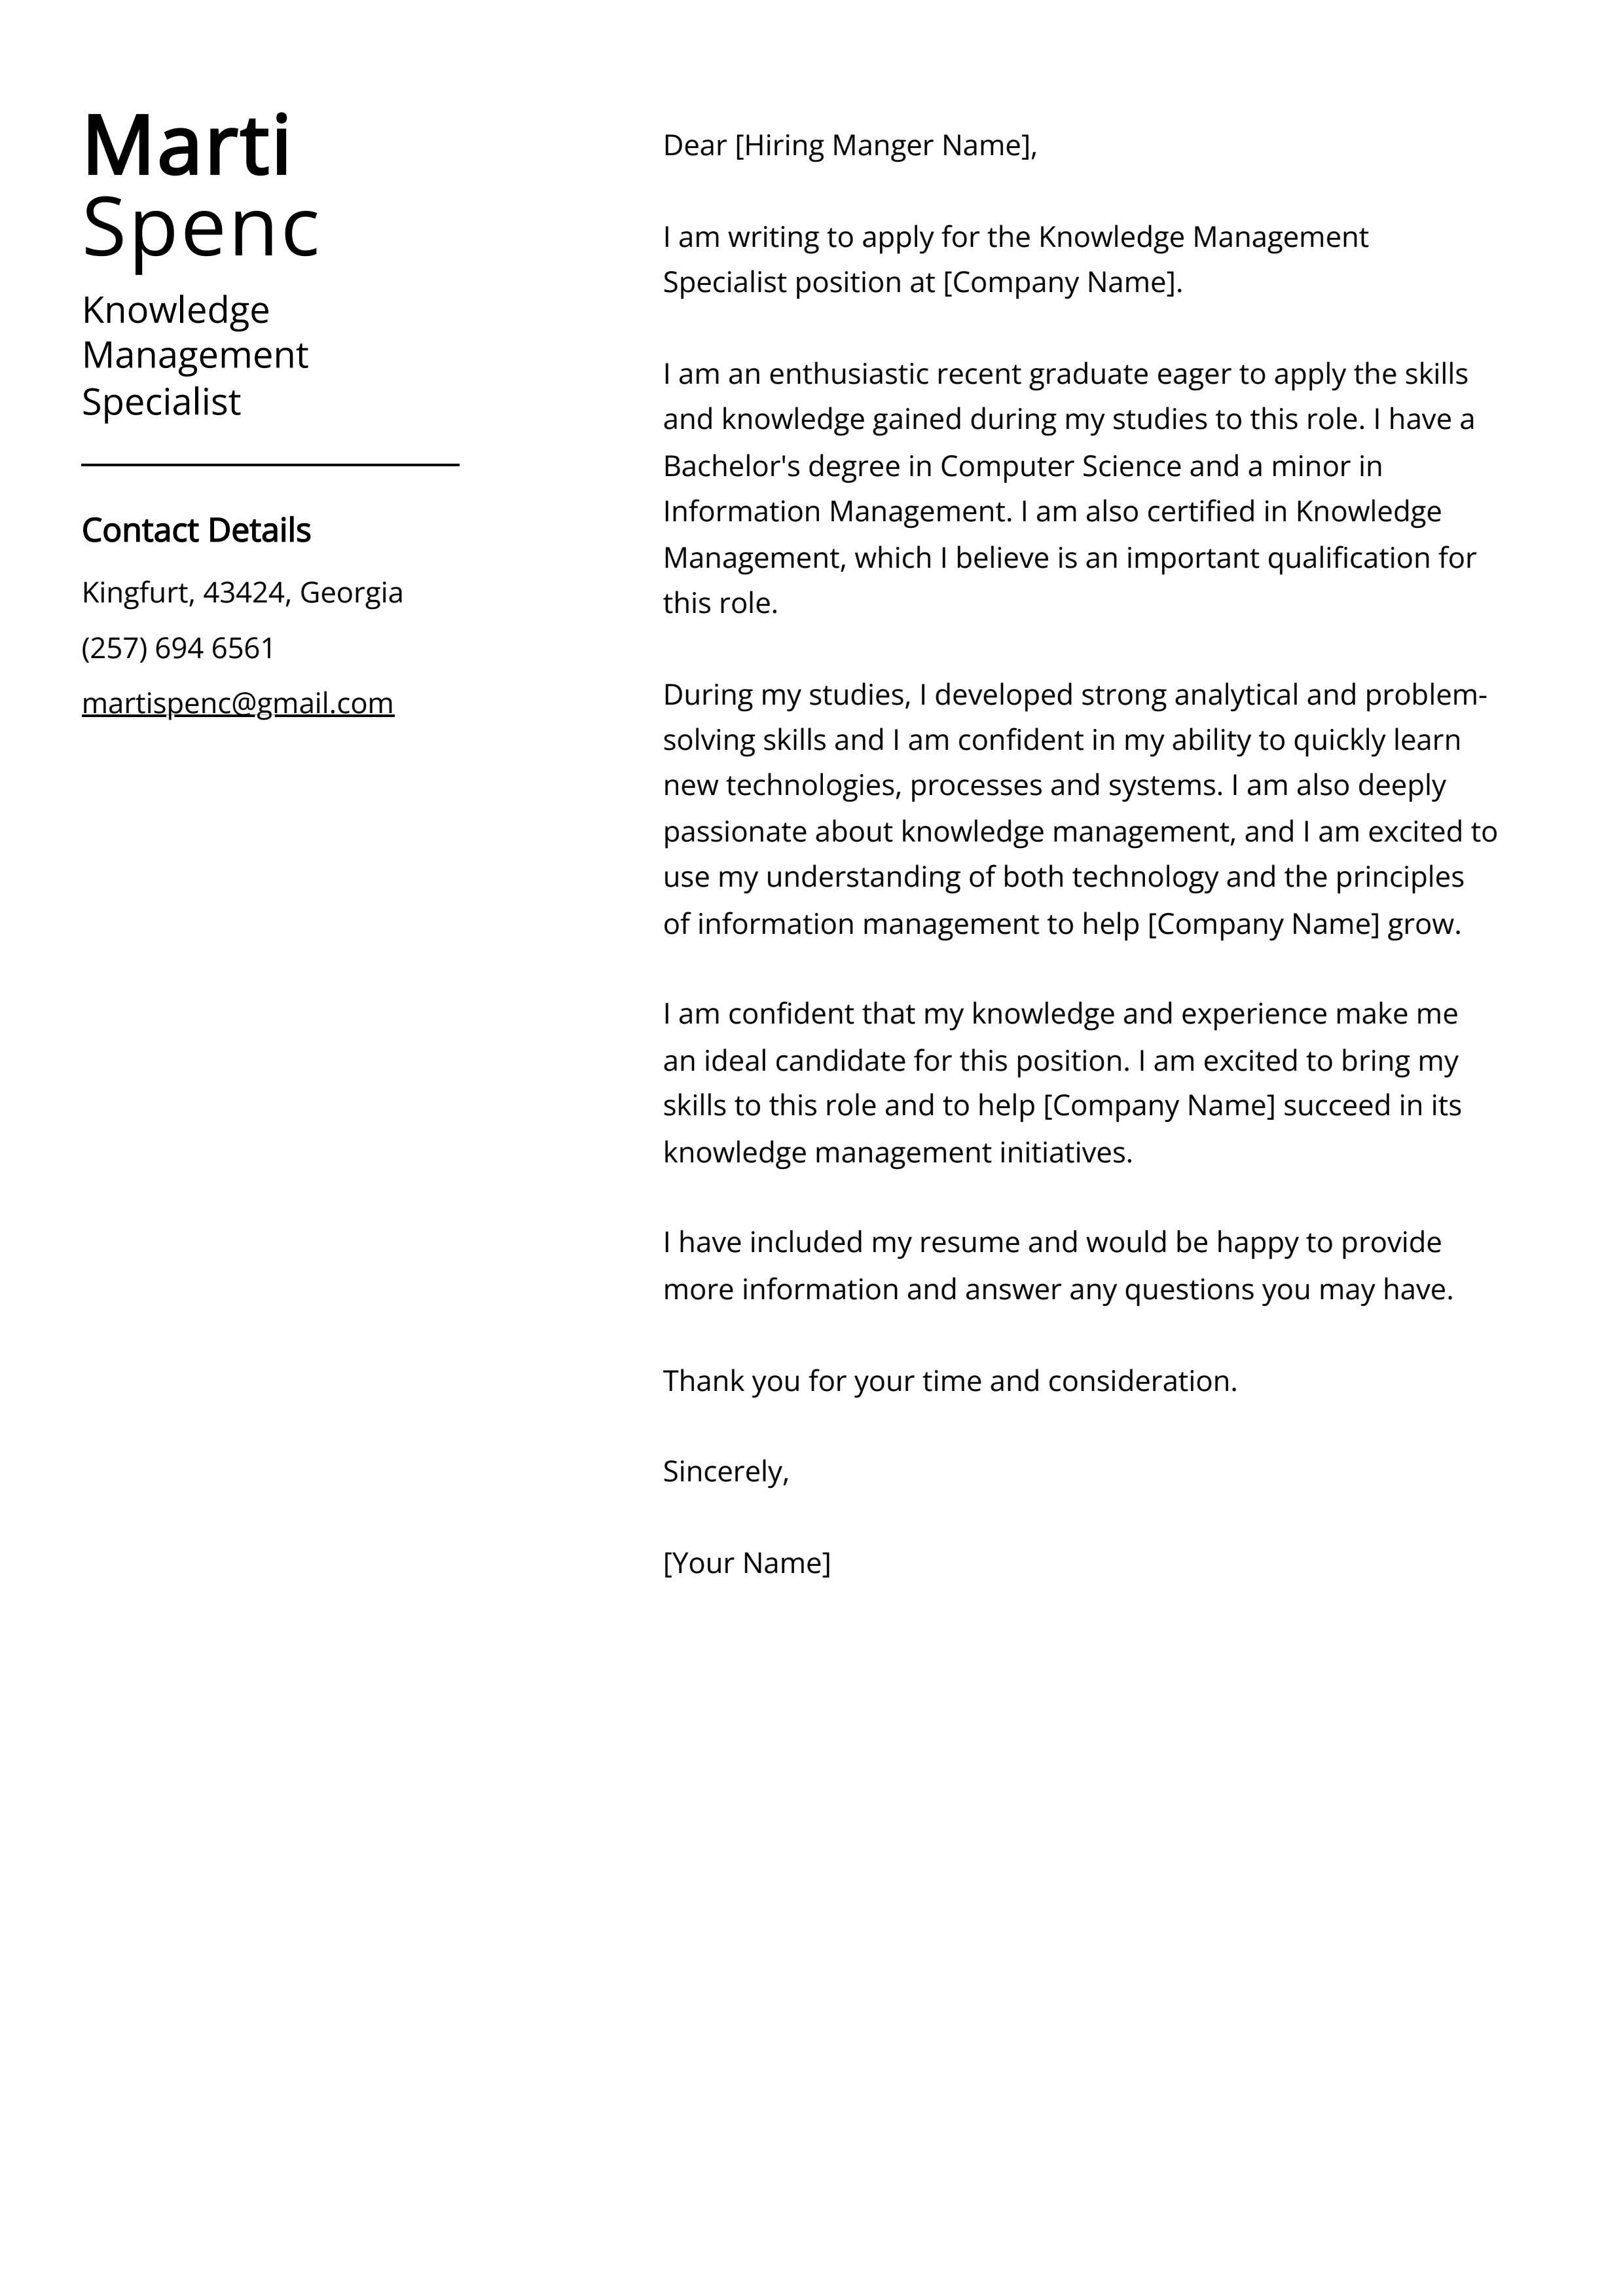 Knowledge Management Specialist Cover Letter Example